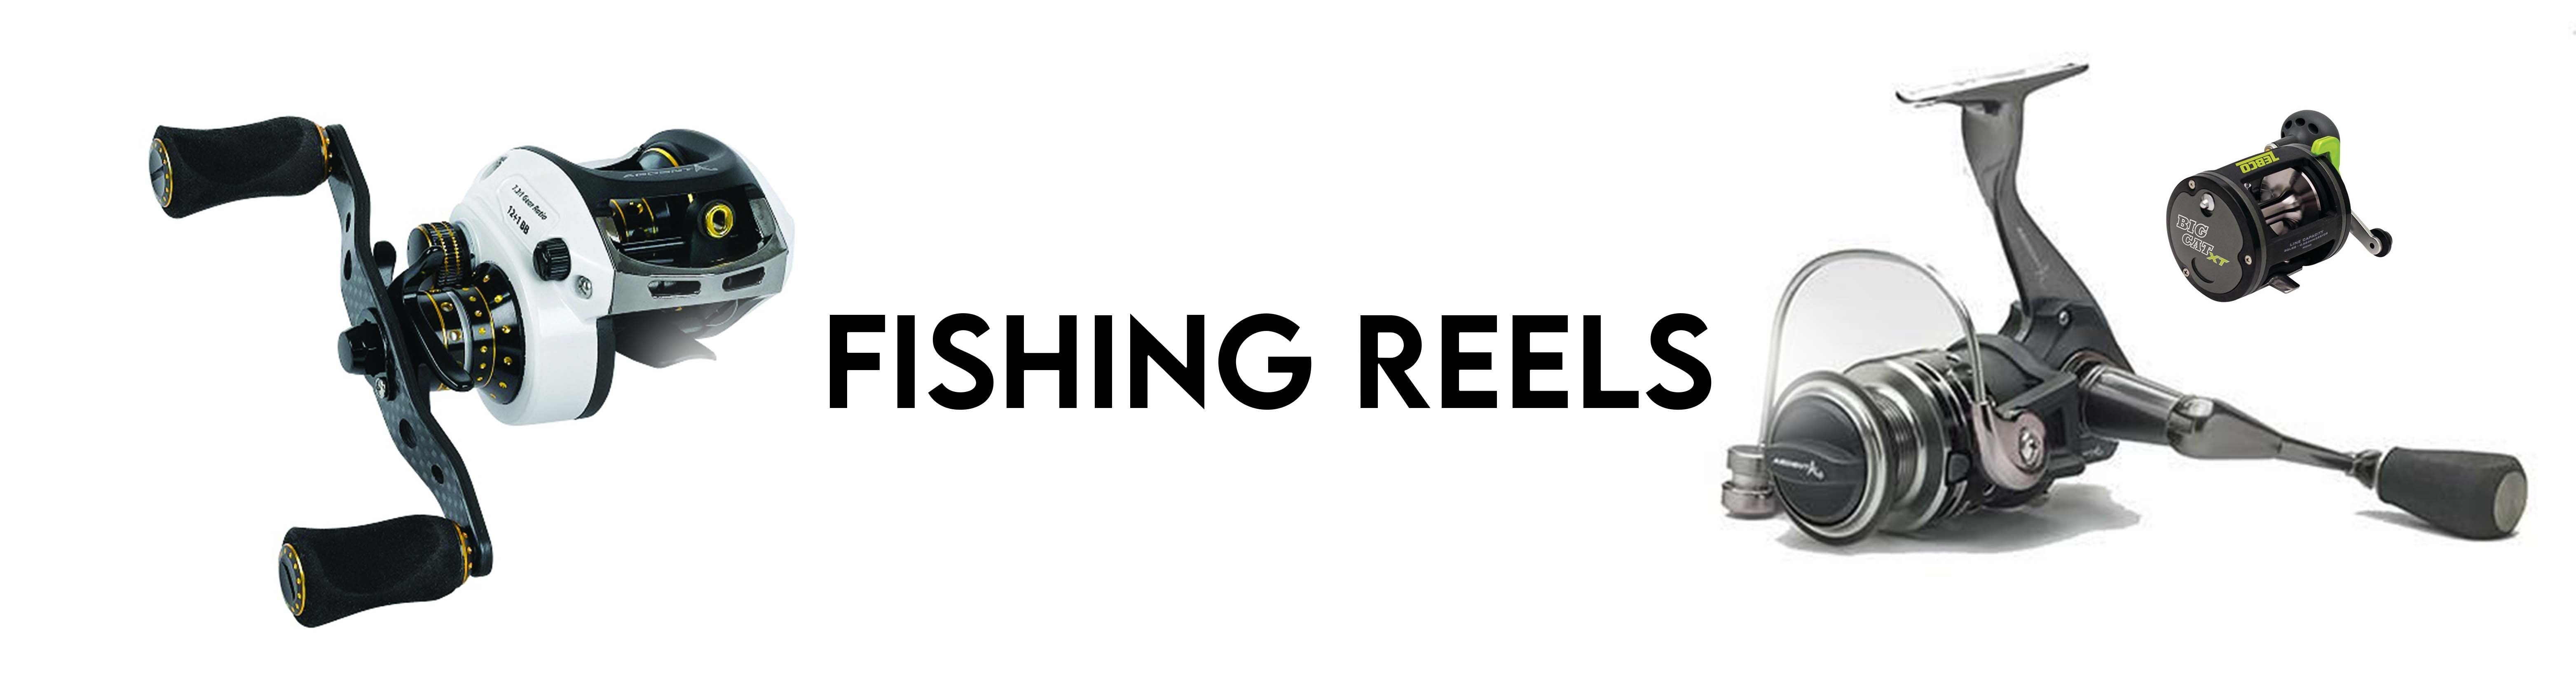 Fishing Reels - Recreation Outfitters